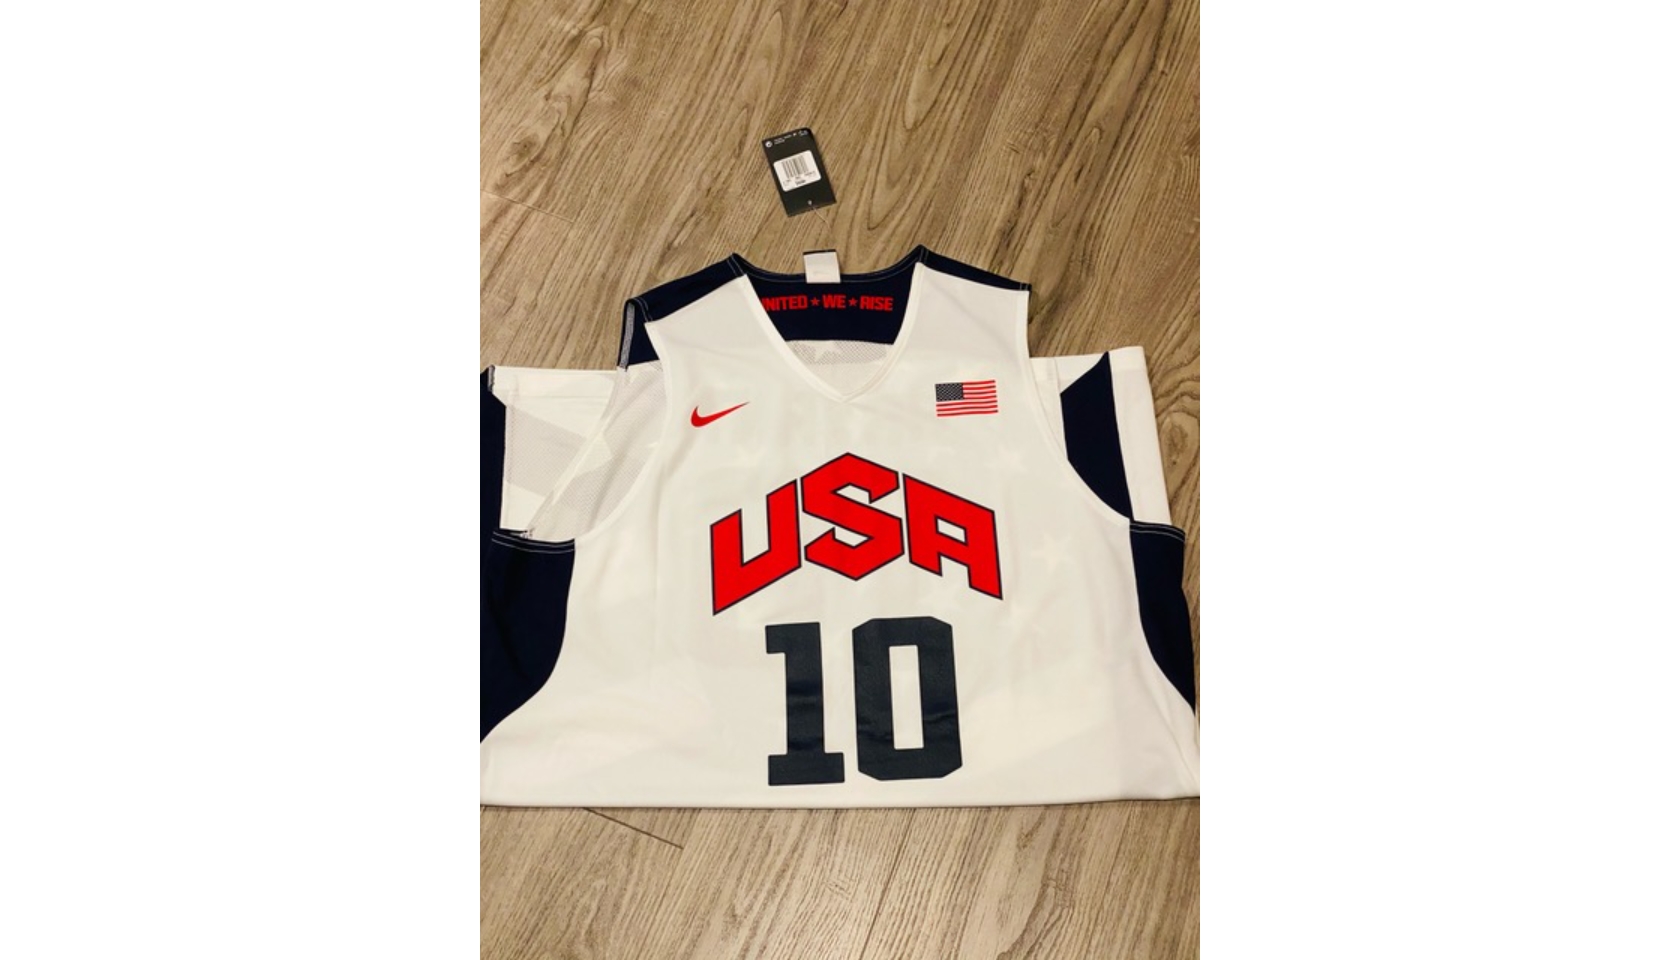 Team USA Kobe Bryant Jersey size large for $100 now available in store!!  AZTHREAD shop BUY, SELL, TRADE 4733 N central ave Phoenix, AZ…